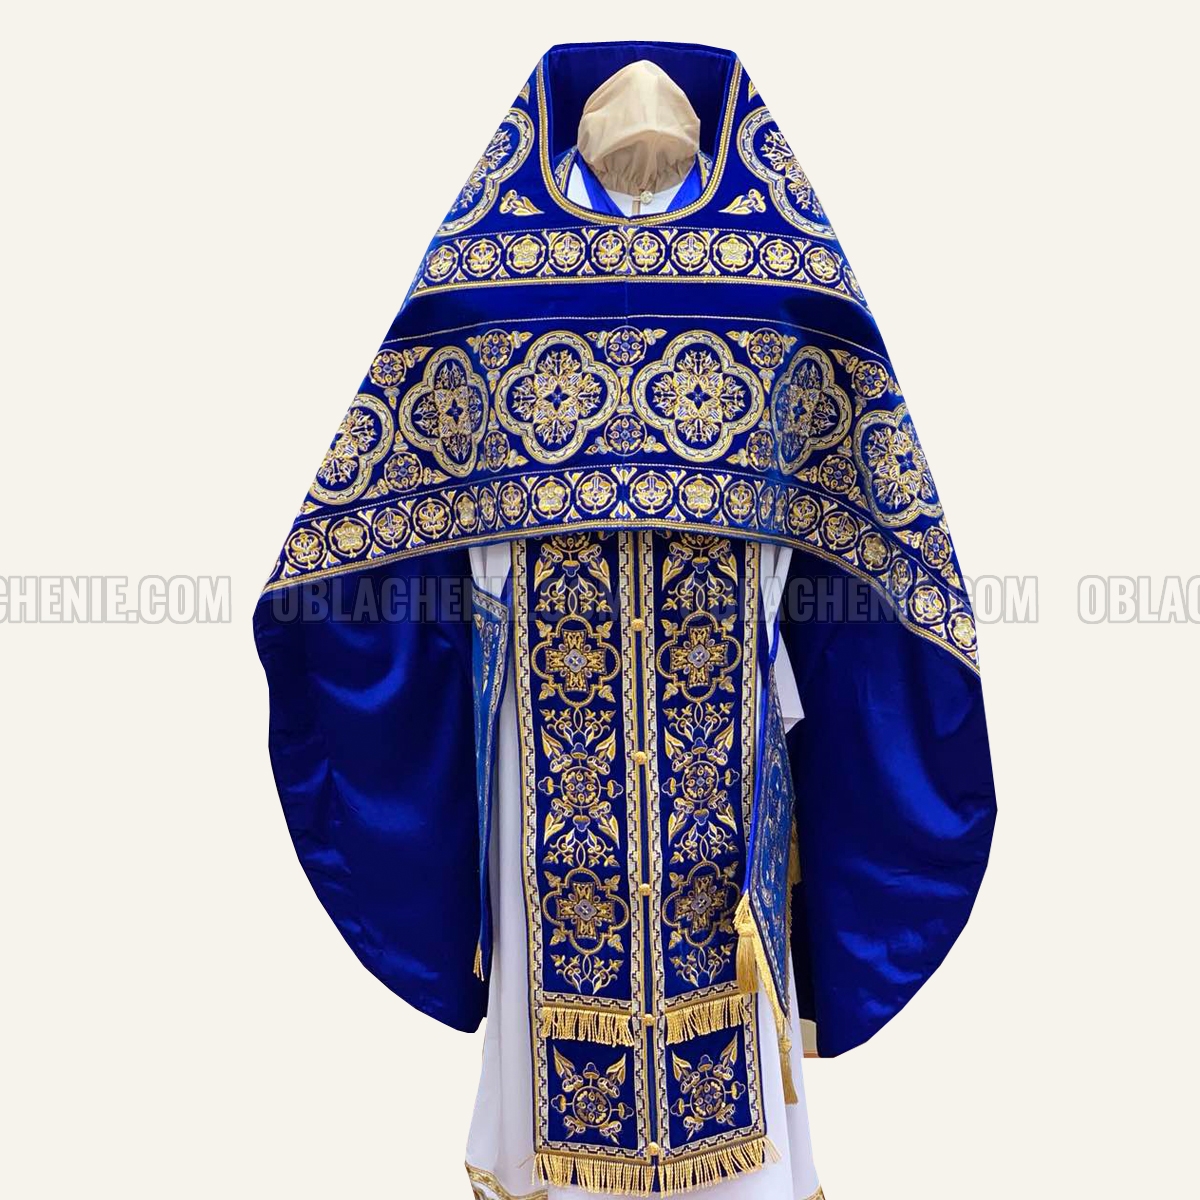 EMBROIDERED PRIEST'S VESTMENTS 10773